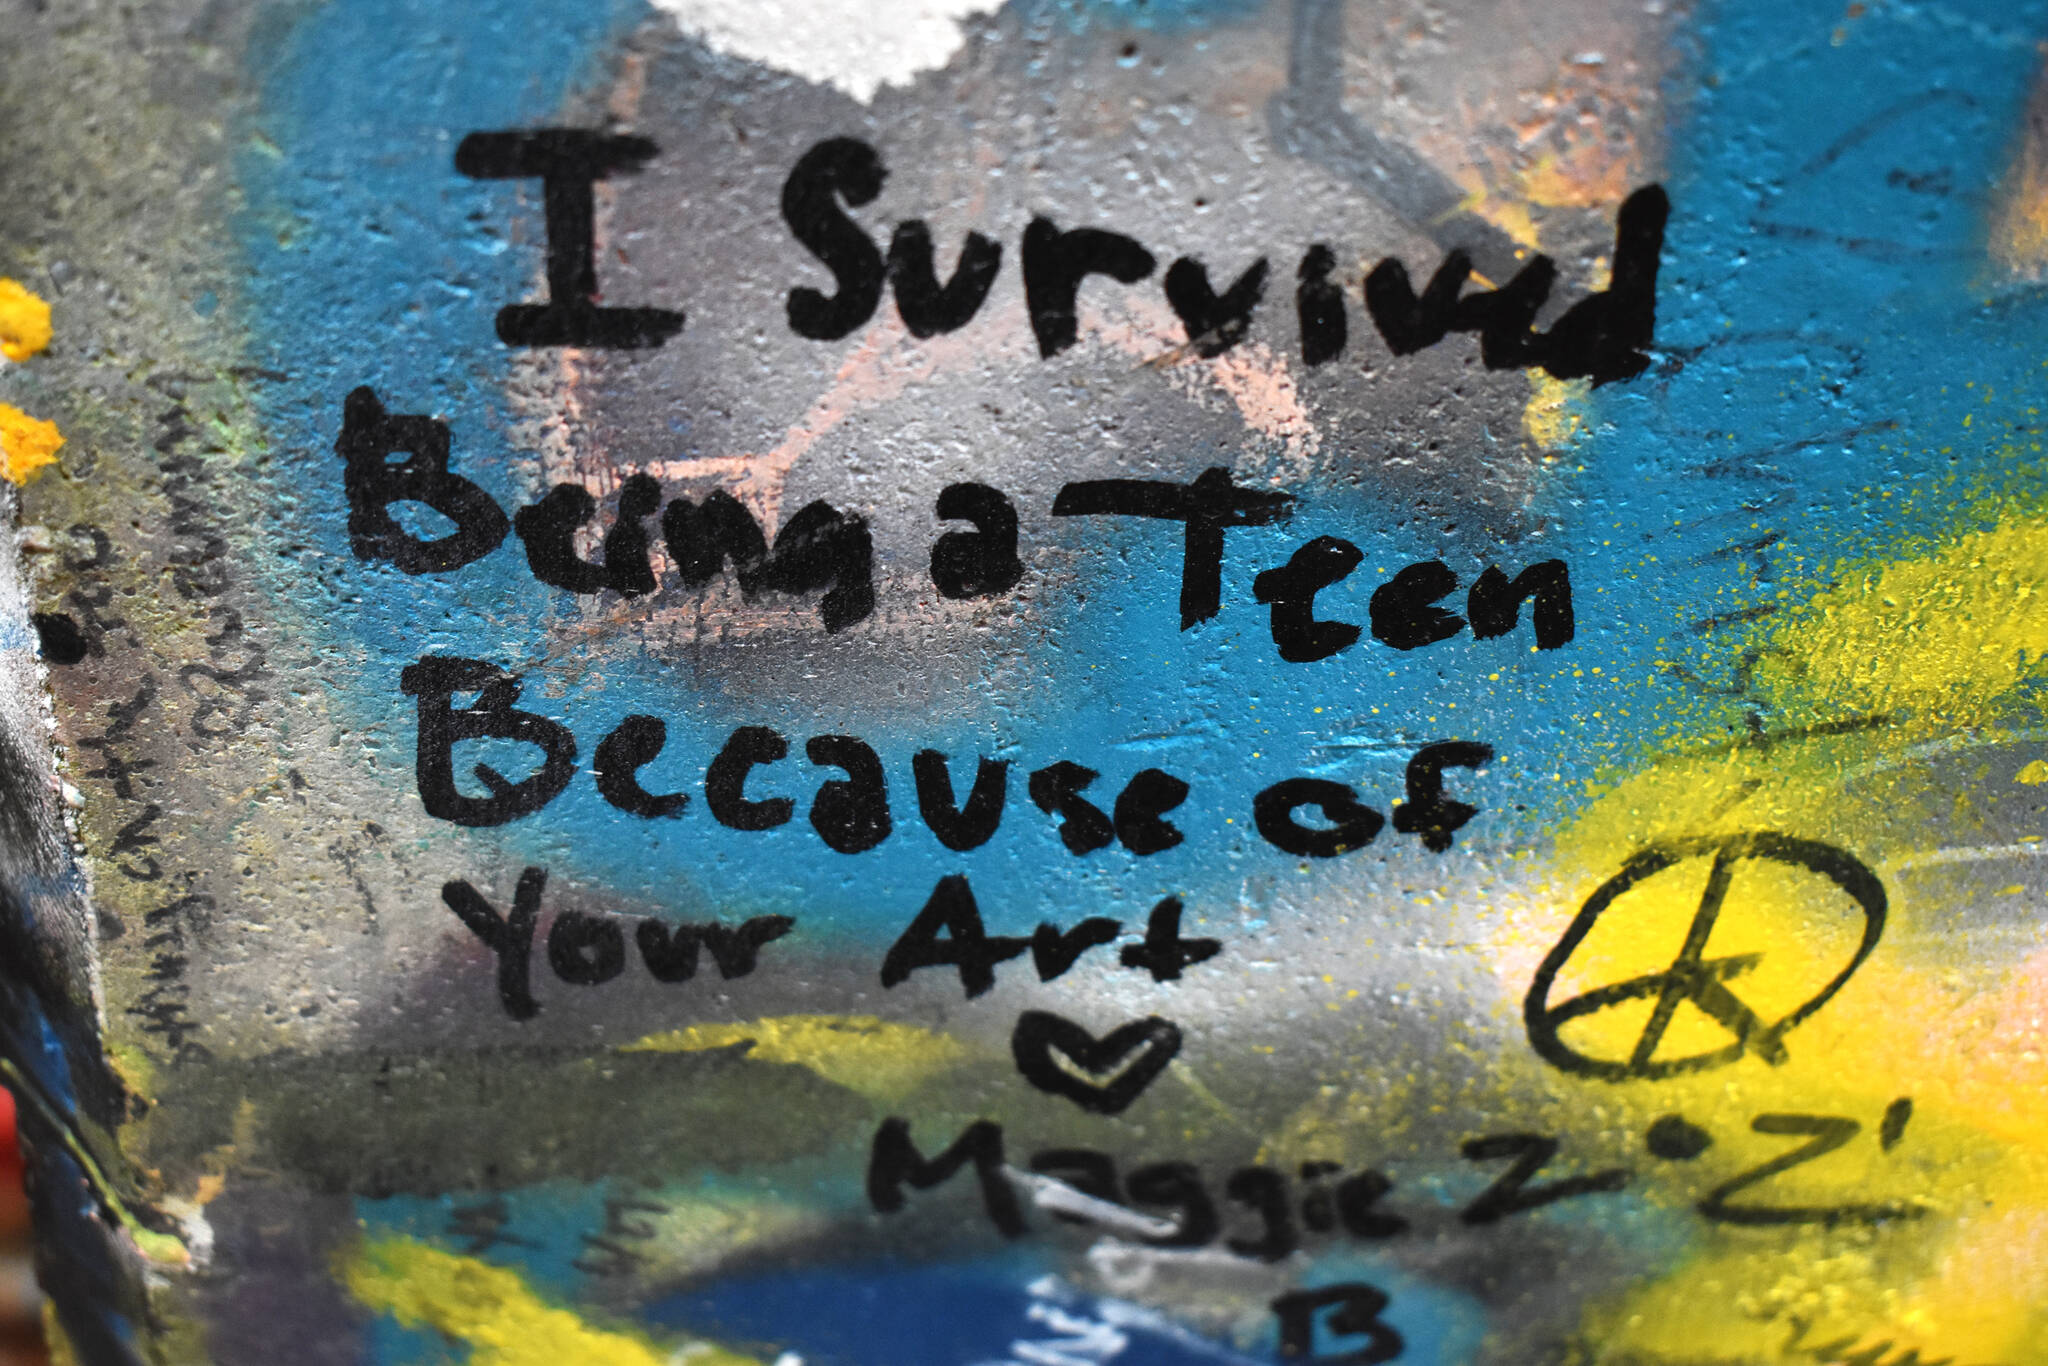 This message, from a person named “Maggie,” describes the tight bond with music that people have. In this case, the message shows how music has comforted them in hard times. The message was written underneath the Young Street Bridge, which is anticipated to be replaced in the coming years. (Matthew N. Wells / The Daily World)